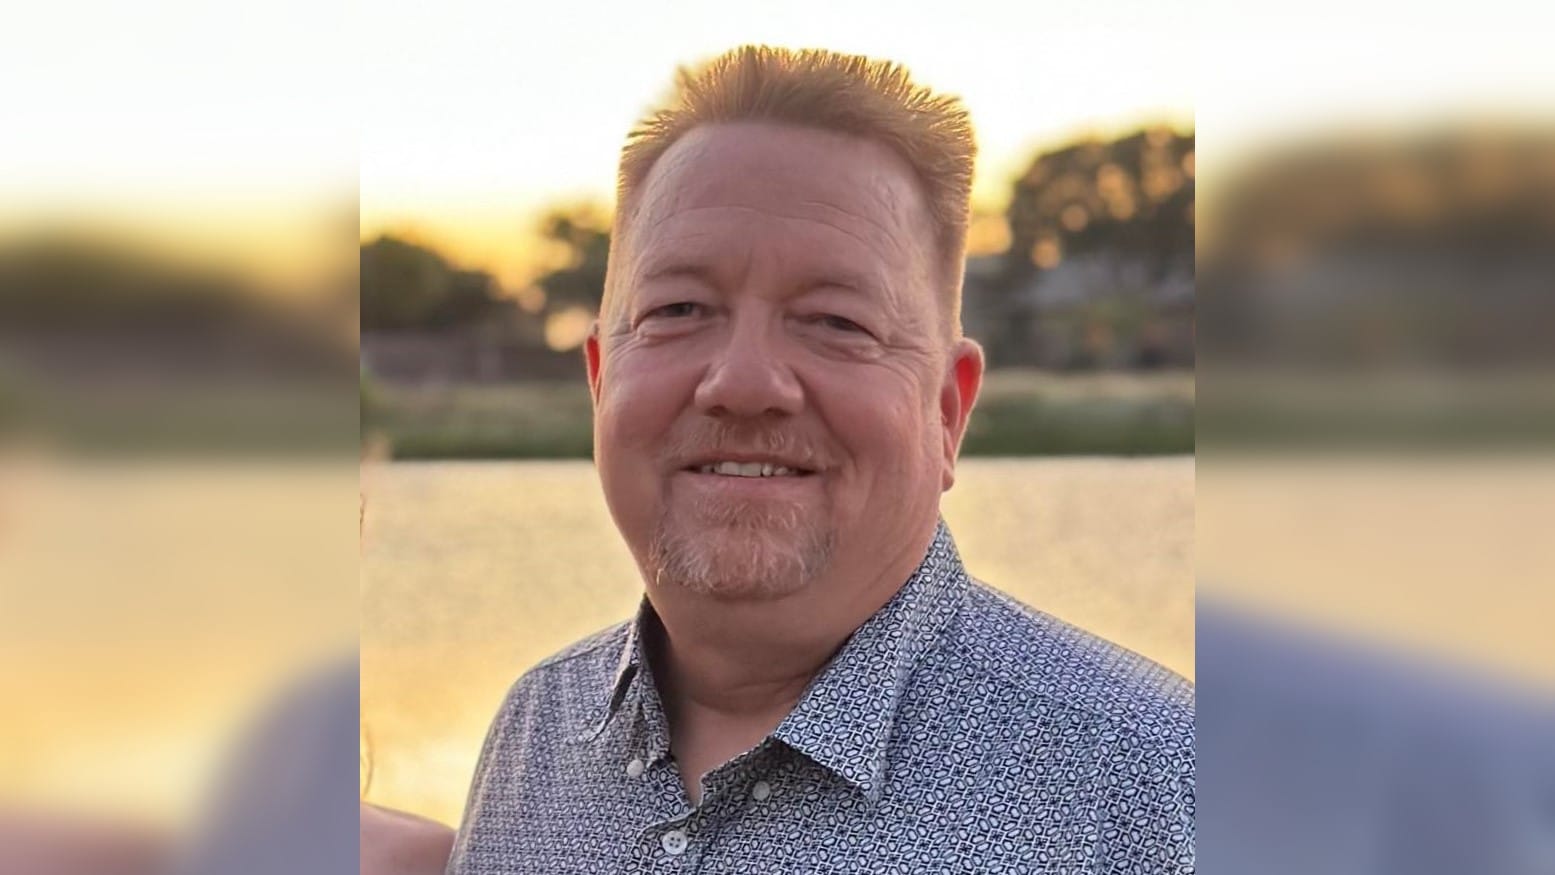 Missing Texas Pastor and Father of 5 Found Dead After 6-Day Search